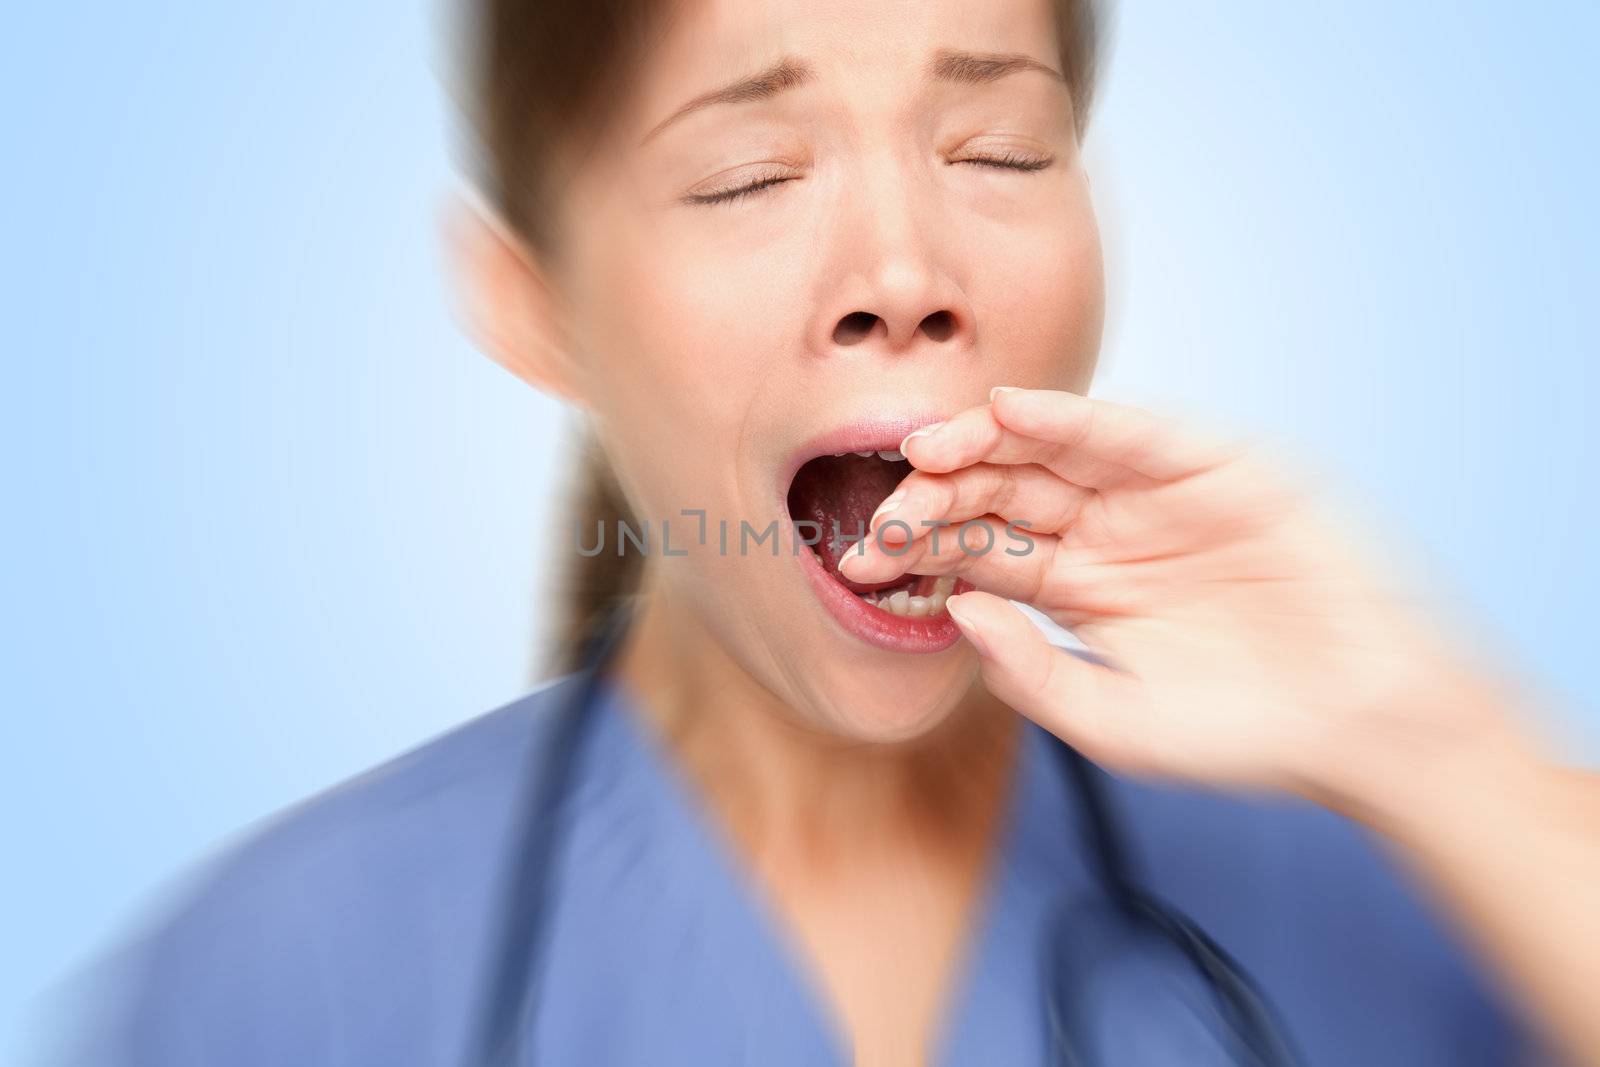 Tired young female nurse / doctor yawning at work. Young Asian / Caucasian woman model. Studio photo.